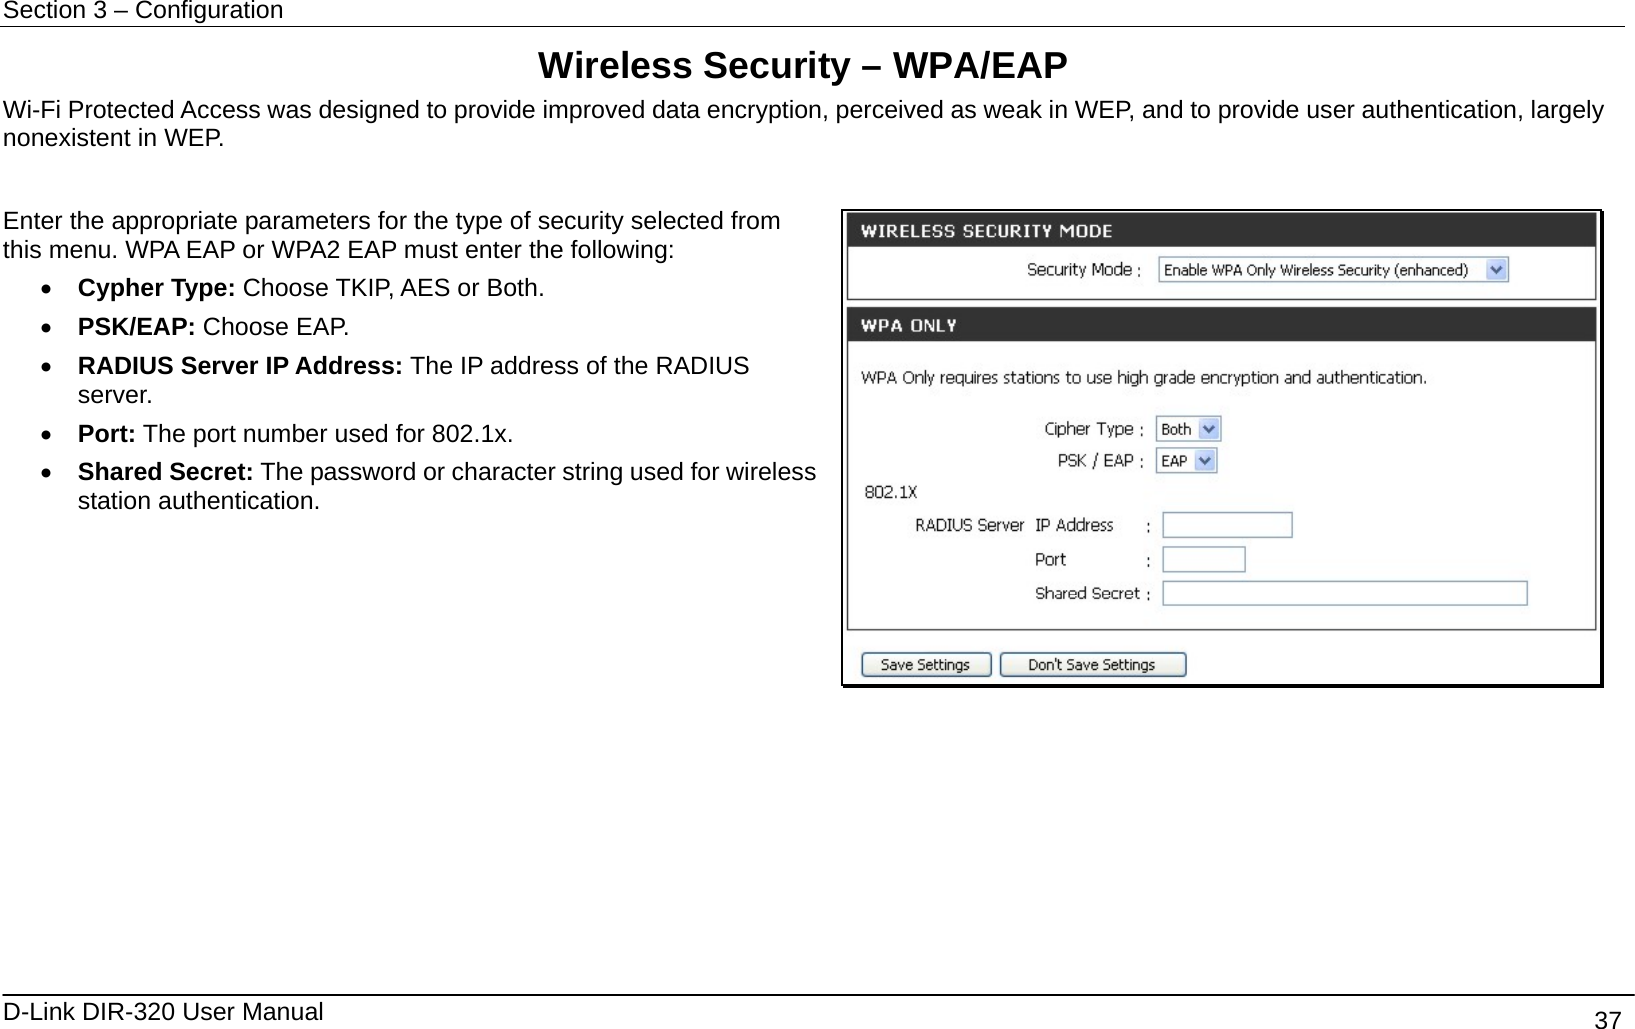 Section 3 – Configuration   D-Link DIR-320 User Manual                                       37 Wireless Security – WPA/EAP Wi-Fi Protected Access was designed to provide improved data encryption, perceived as weak in WEP, and to provide user authentication, largely nonexistent in WEP.  Enter the appropriate parameters for the type of security selected from this menu. WPA EAP or WPA2 EAP must enter the following: •  Cypher Type: Choose TKIP, AES or Both. •  PSK/EAP: Choose EAP. •  RADIUS Server IP Address: The IP address of the RADIUS server.  •  Port: The port number used for 802.1x. •  Shared Secret: The password or character string used for wireless station authentication.             